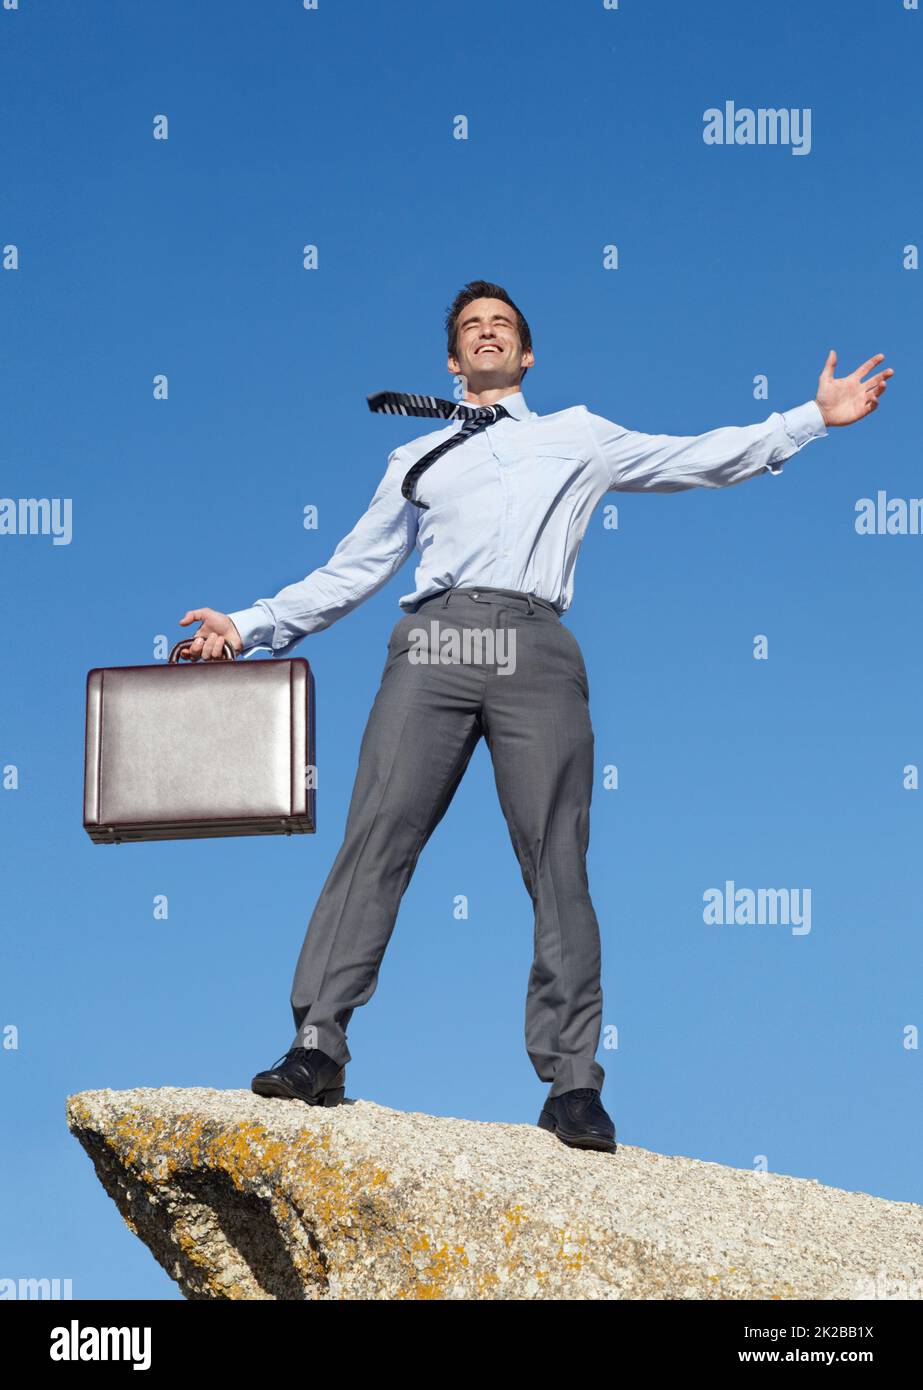 Theres no limit to what I can achieve now. An elated young businessman holding a briefcase standing atop a cliff. Stock Photo